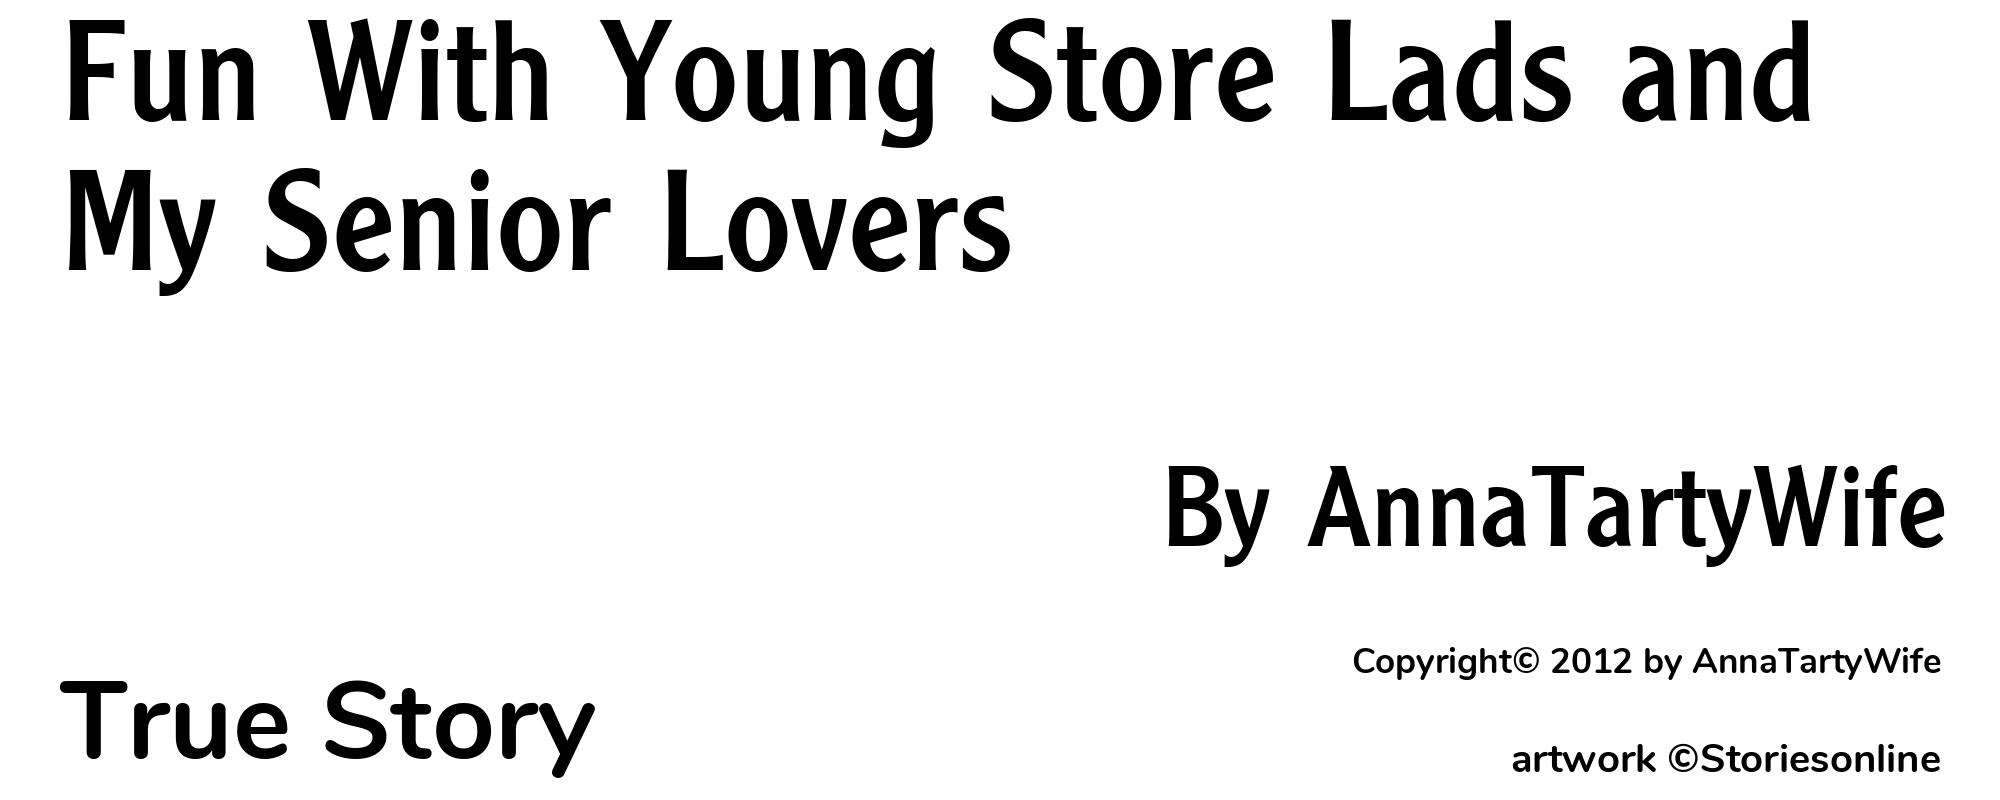 Fun With Young Store Lads and My Senior Lovers - Cover